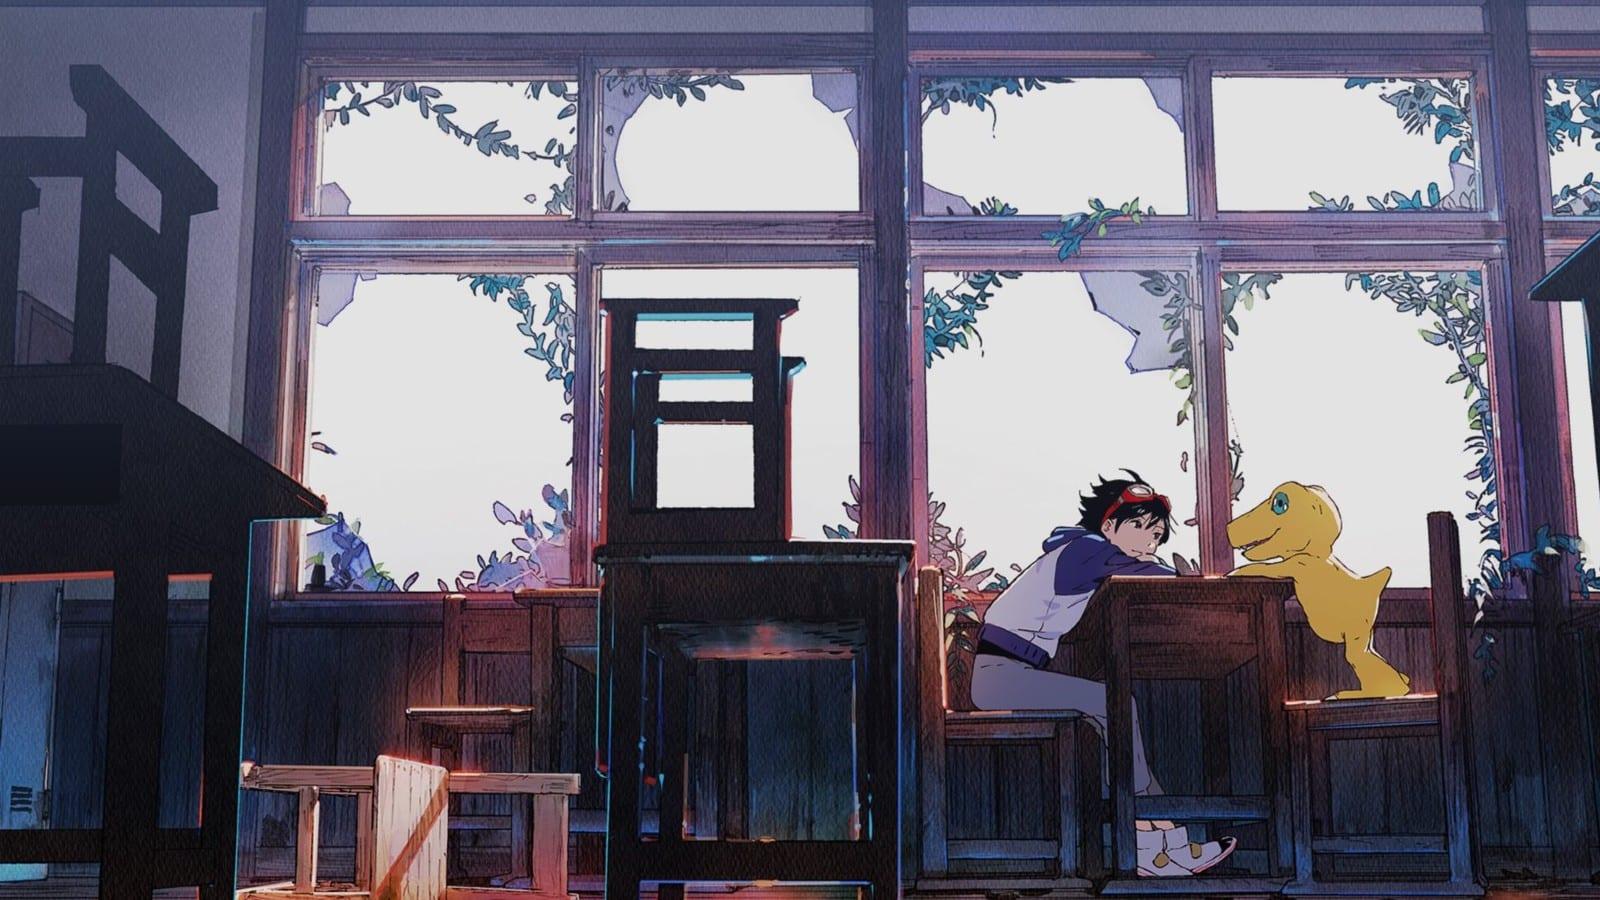 A screenshot from the Digimon Survive title screen, featuring Takuma and Agumon.